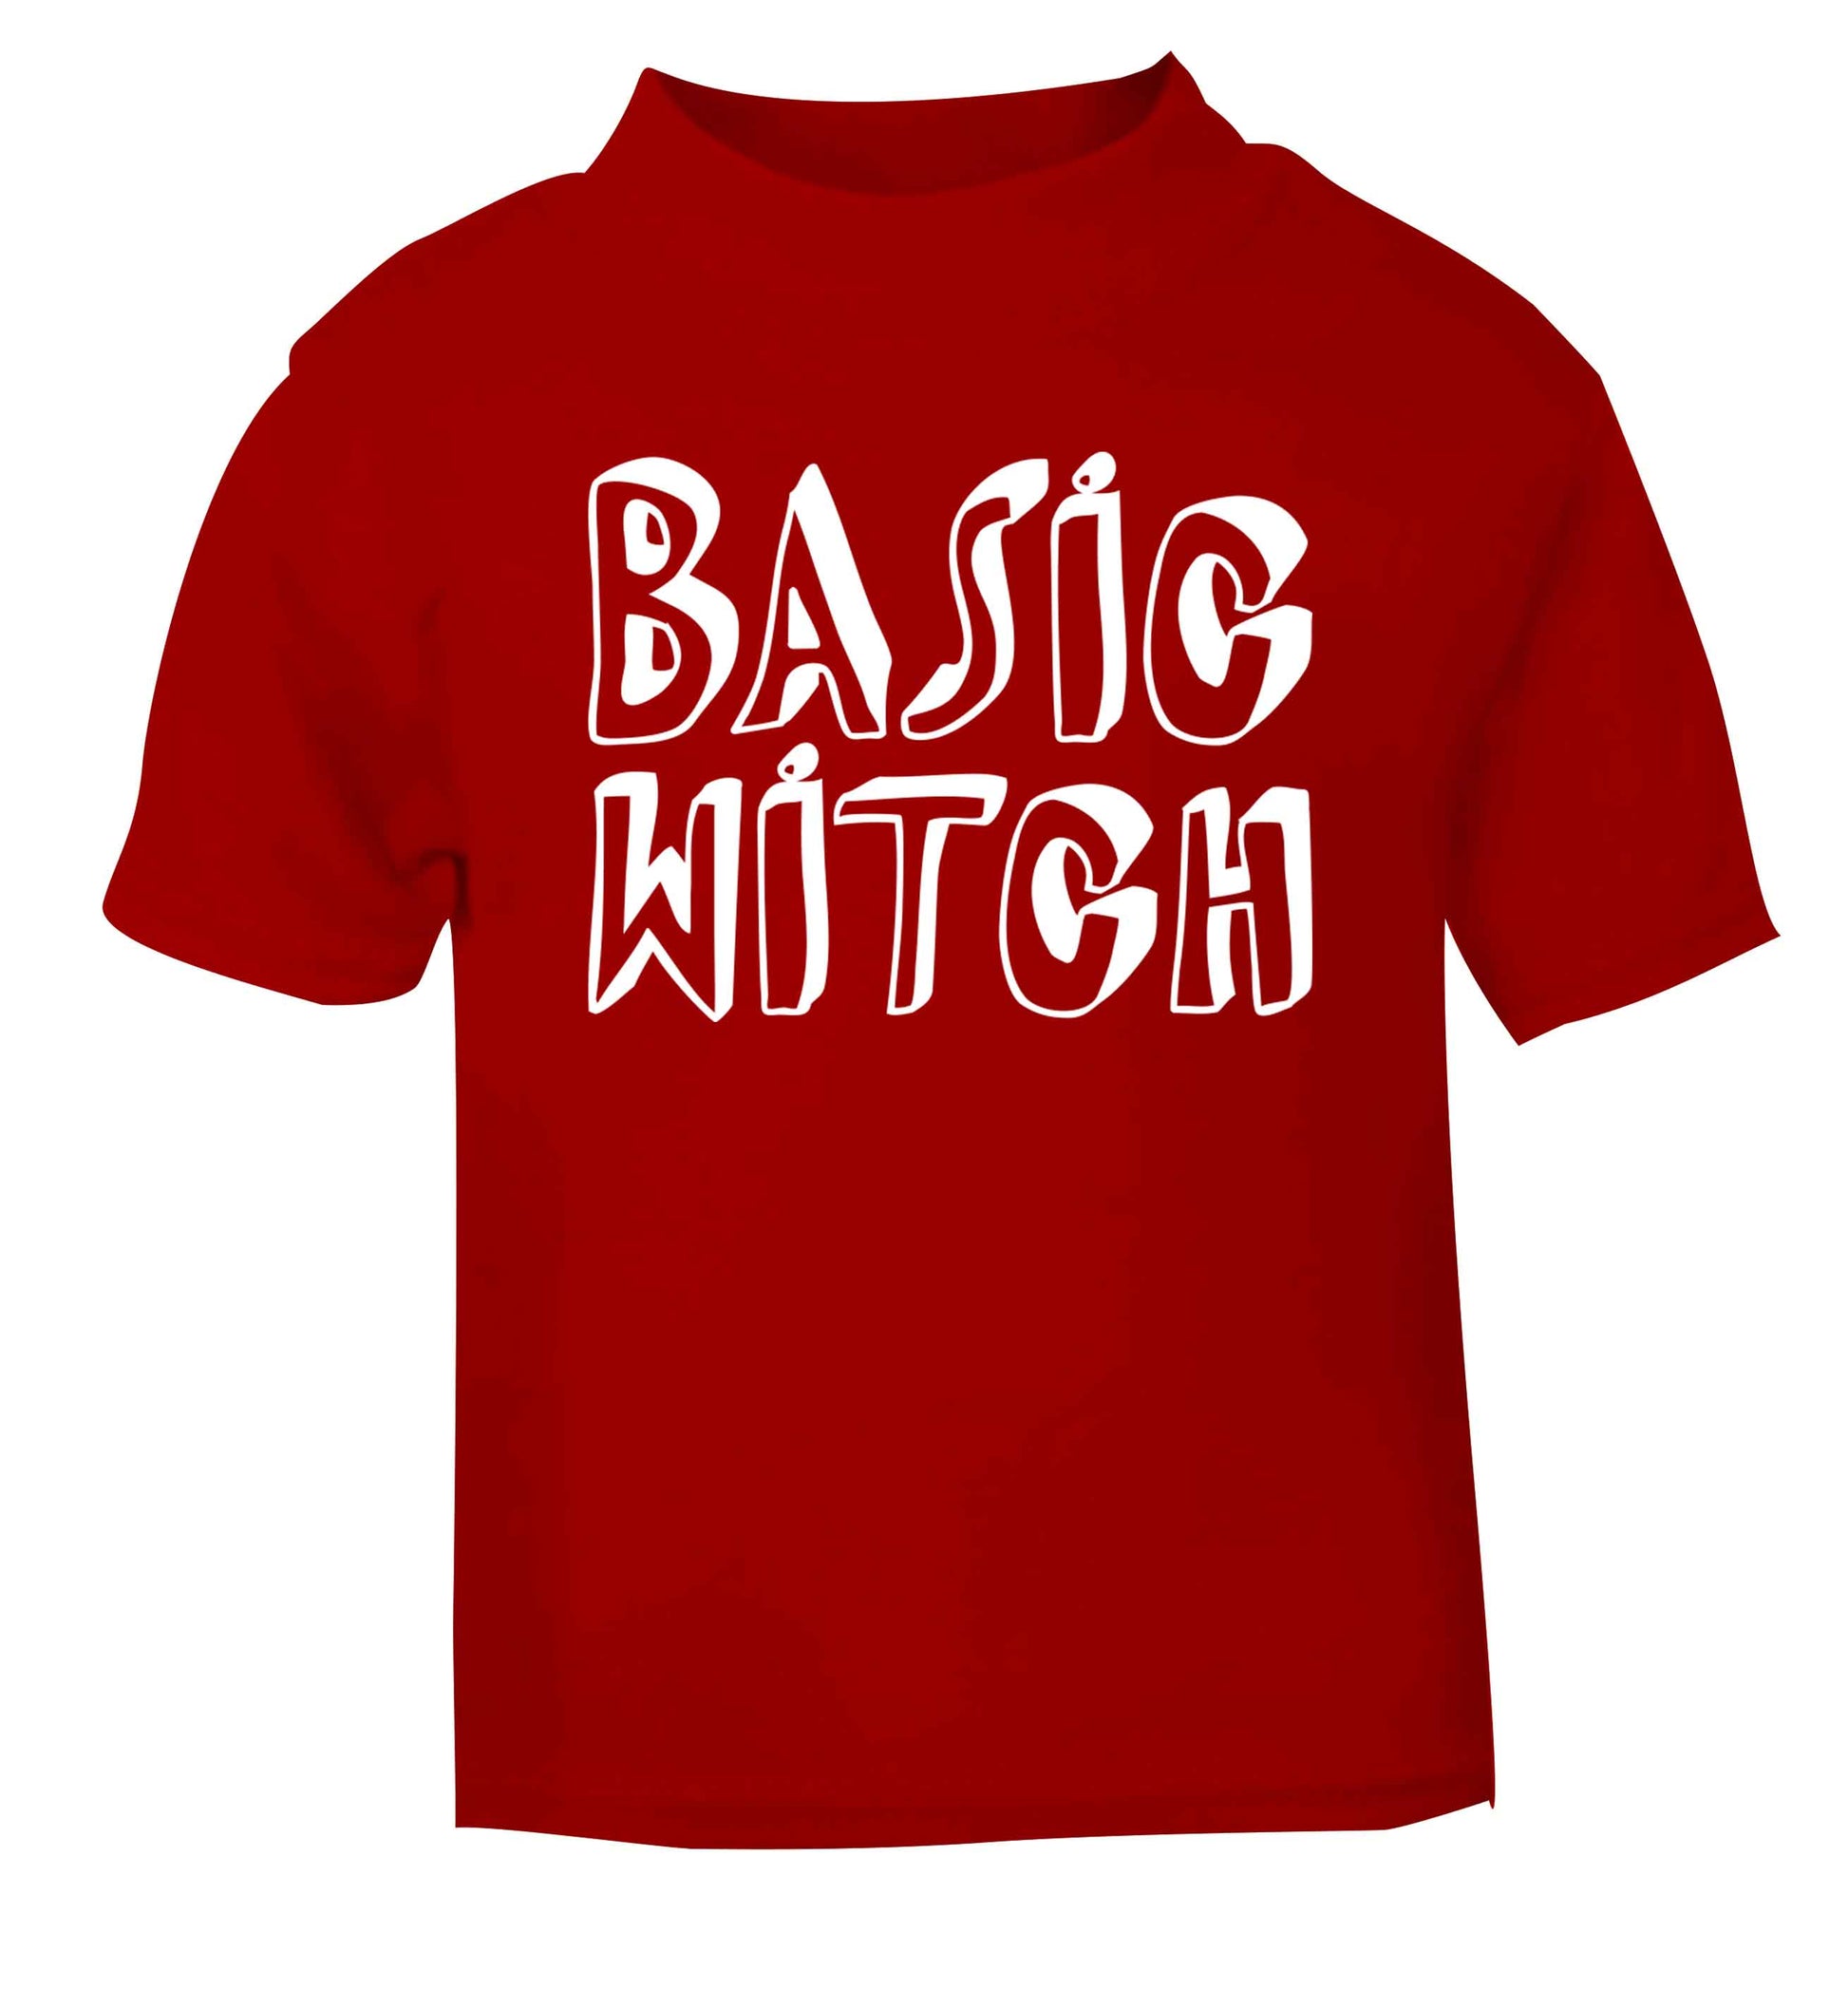 Basic witch red baby toddler Tshirt 2 Years